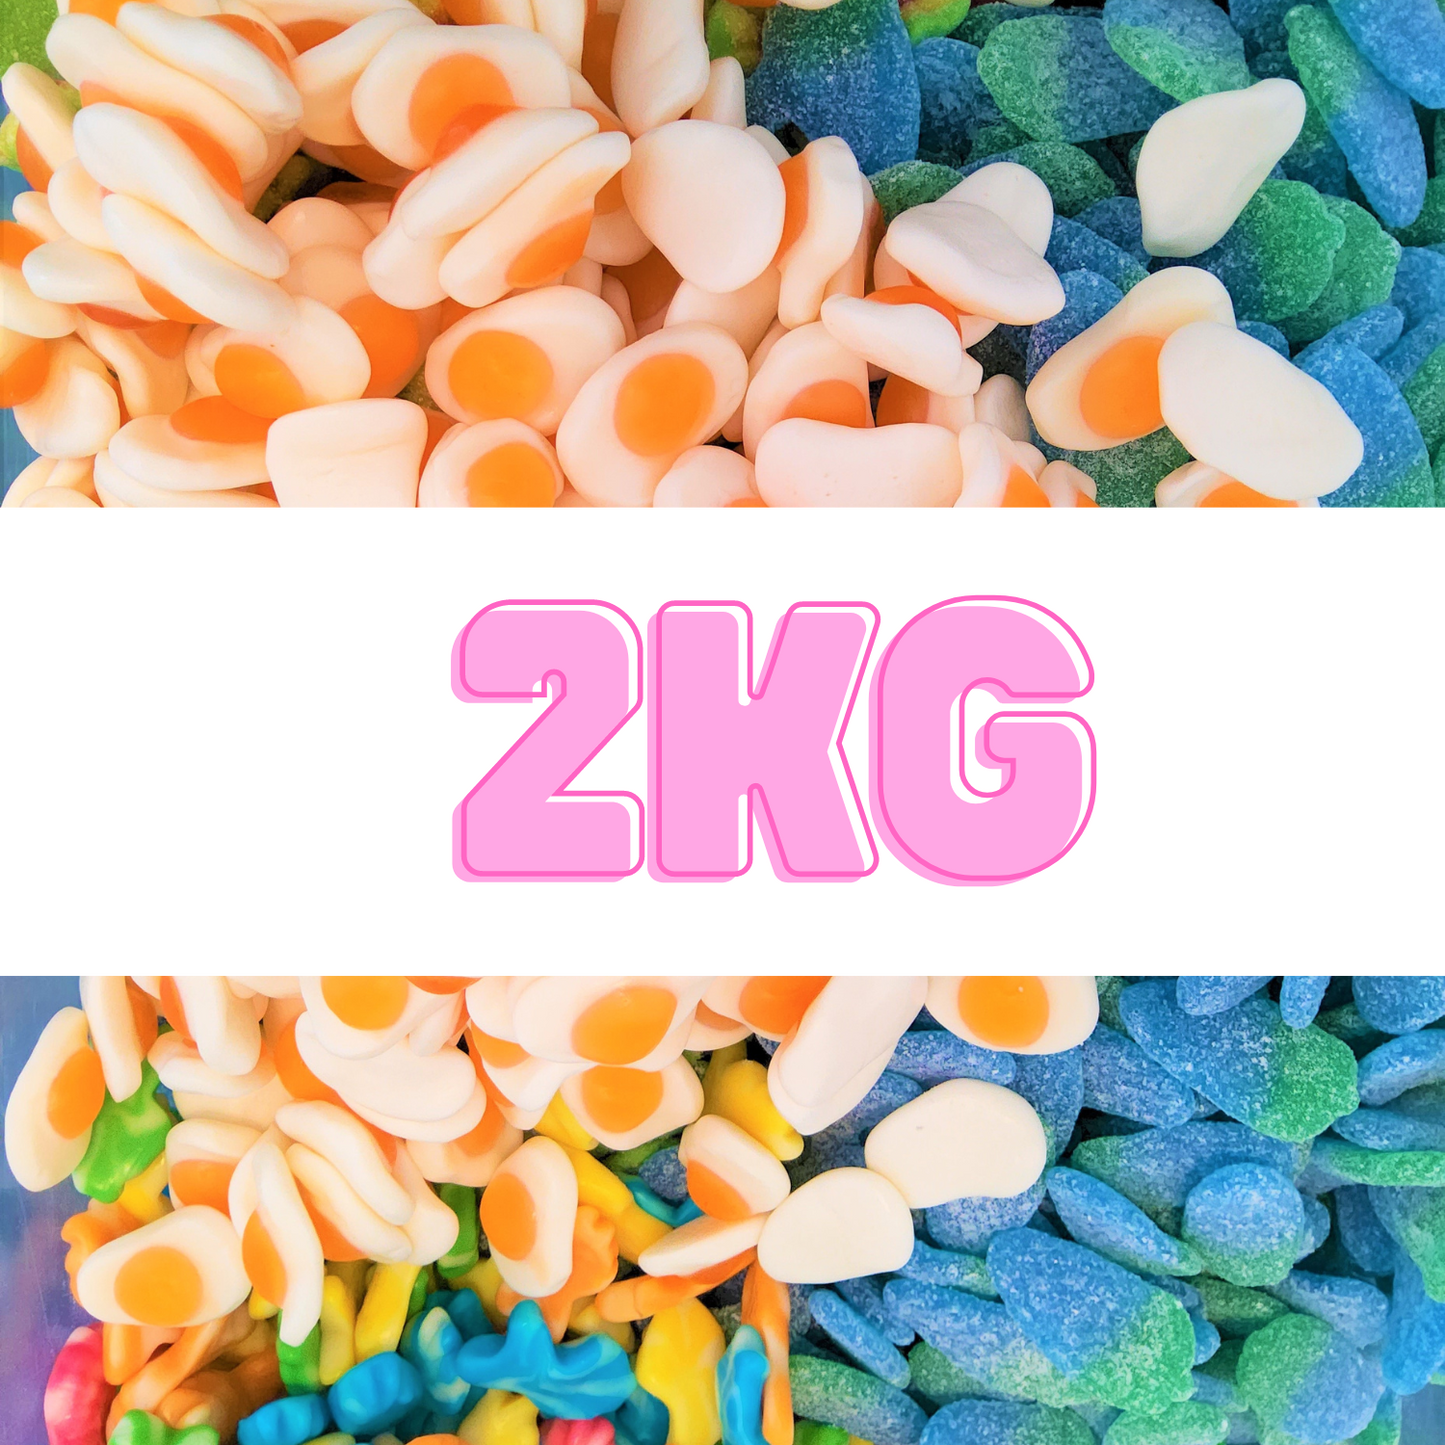 Create Your Own Pick`n MIx 2kg Box / Bag selection